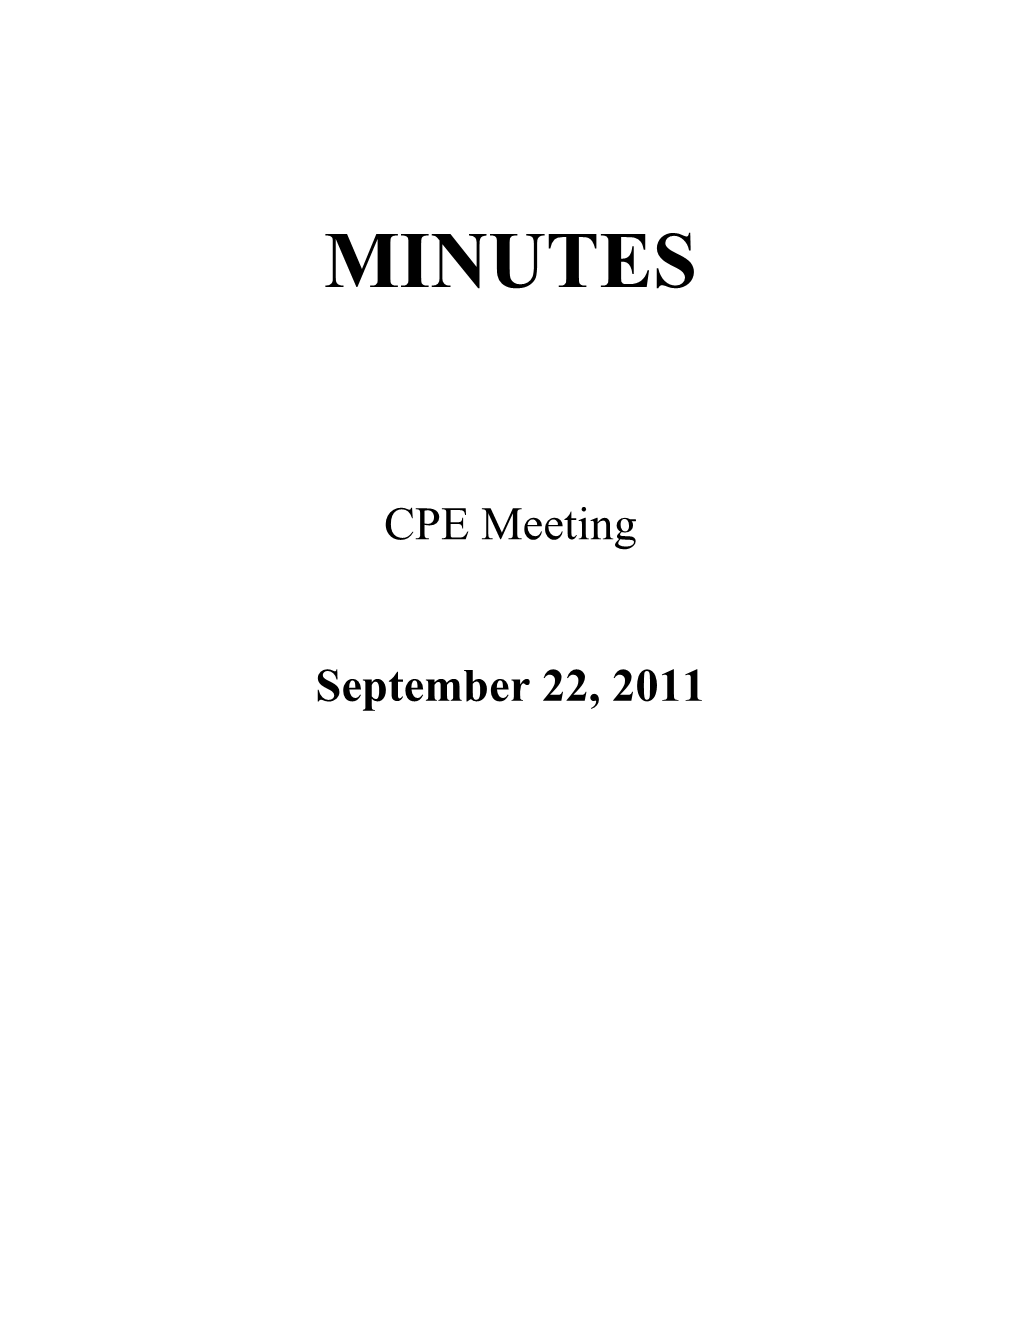 Minutes: Sept. 22, 2011 CPE Meeting